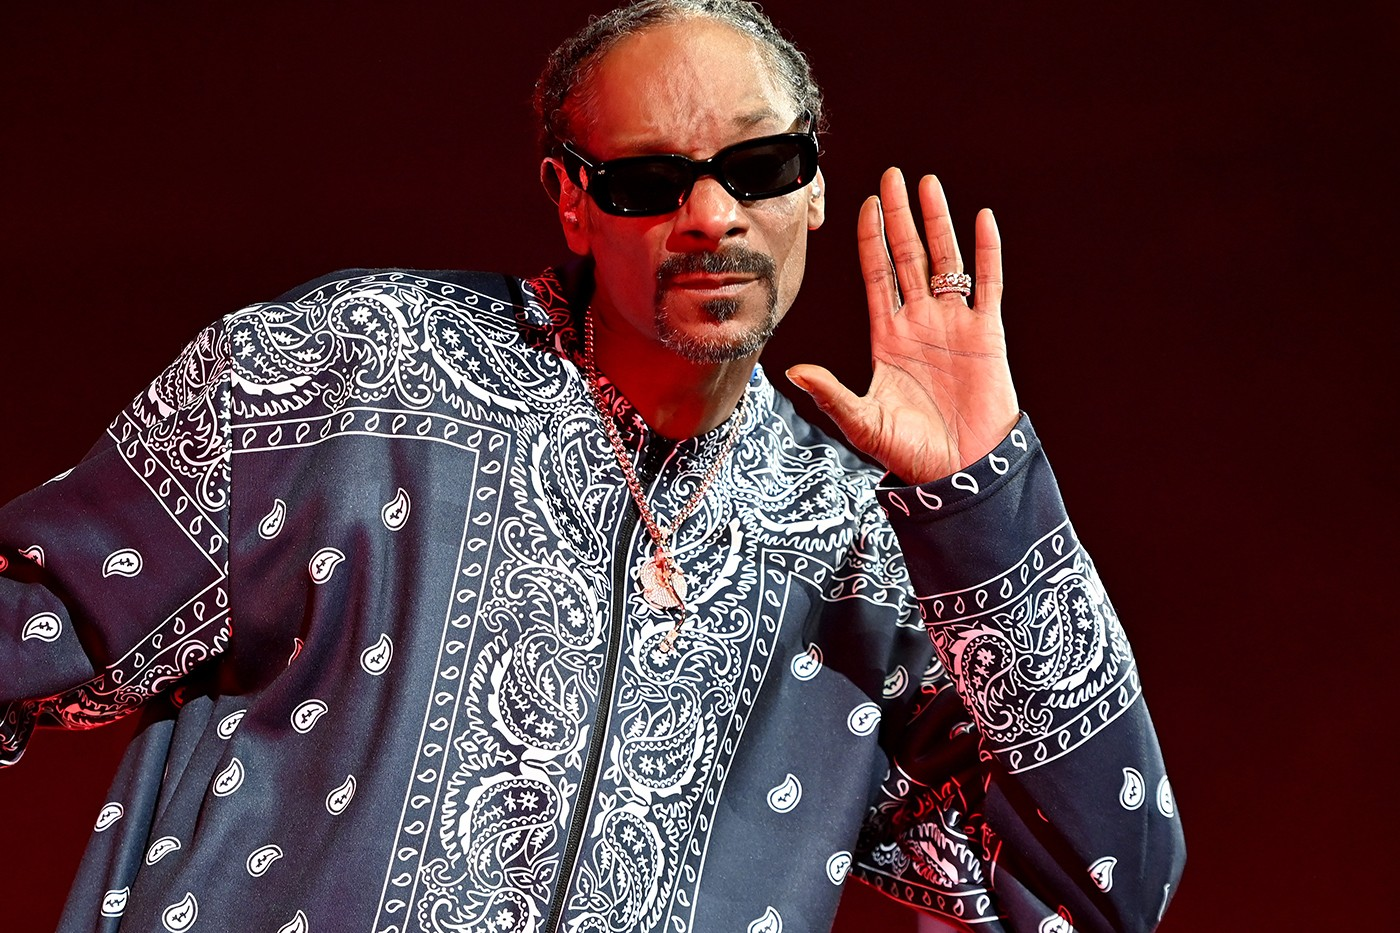 BTS x Snoop Dogg Collaboration To Hit the World Soon With A Thrilling Masterpiece